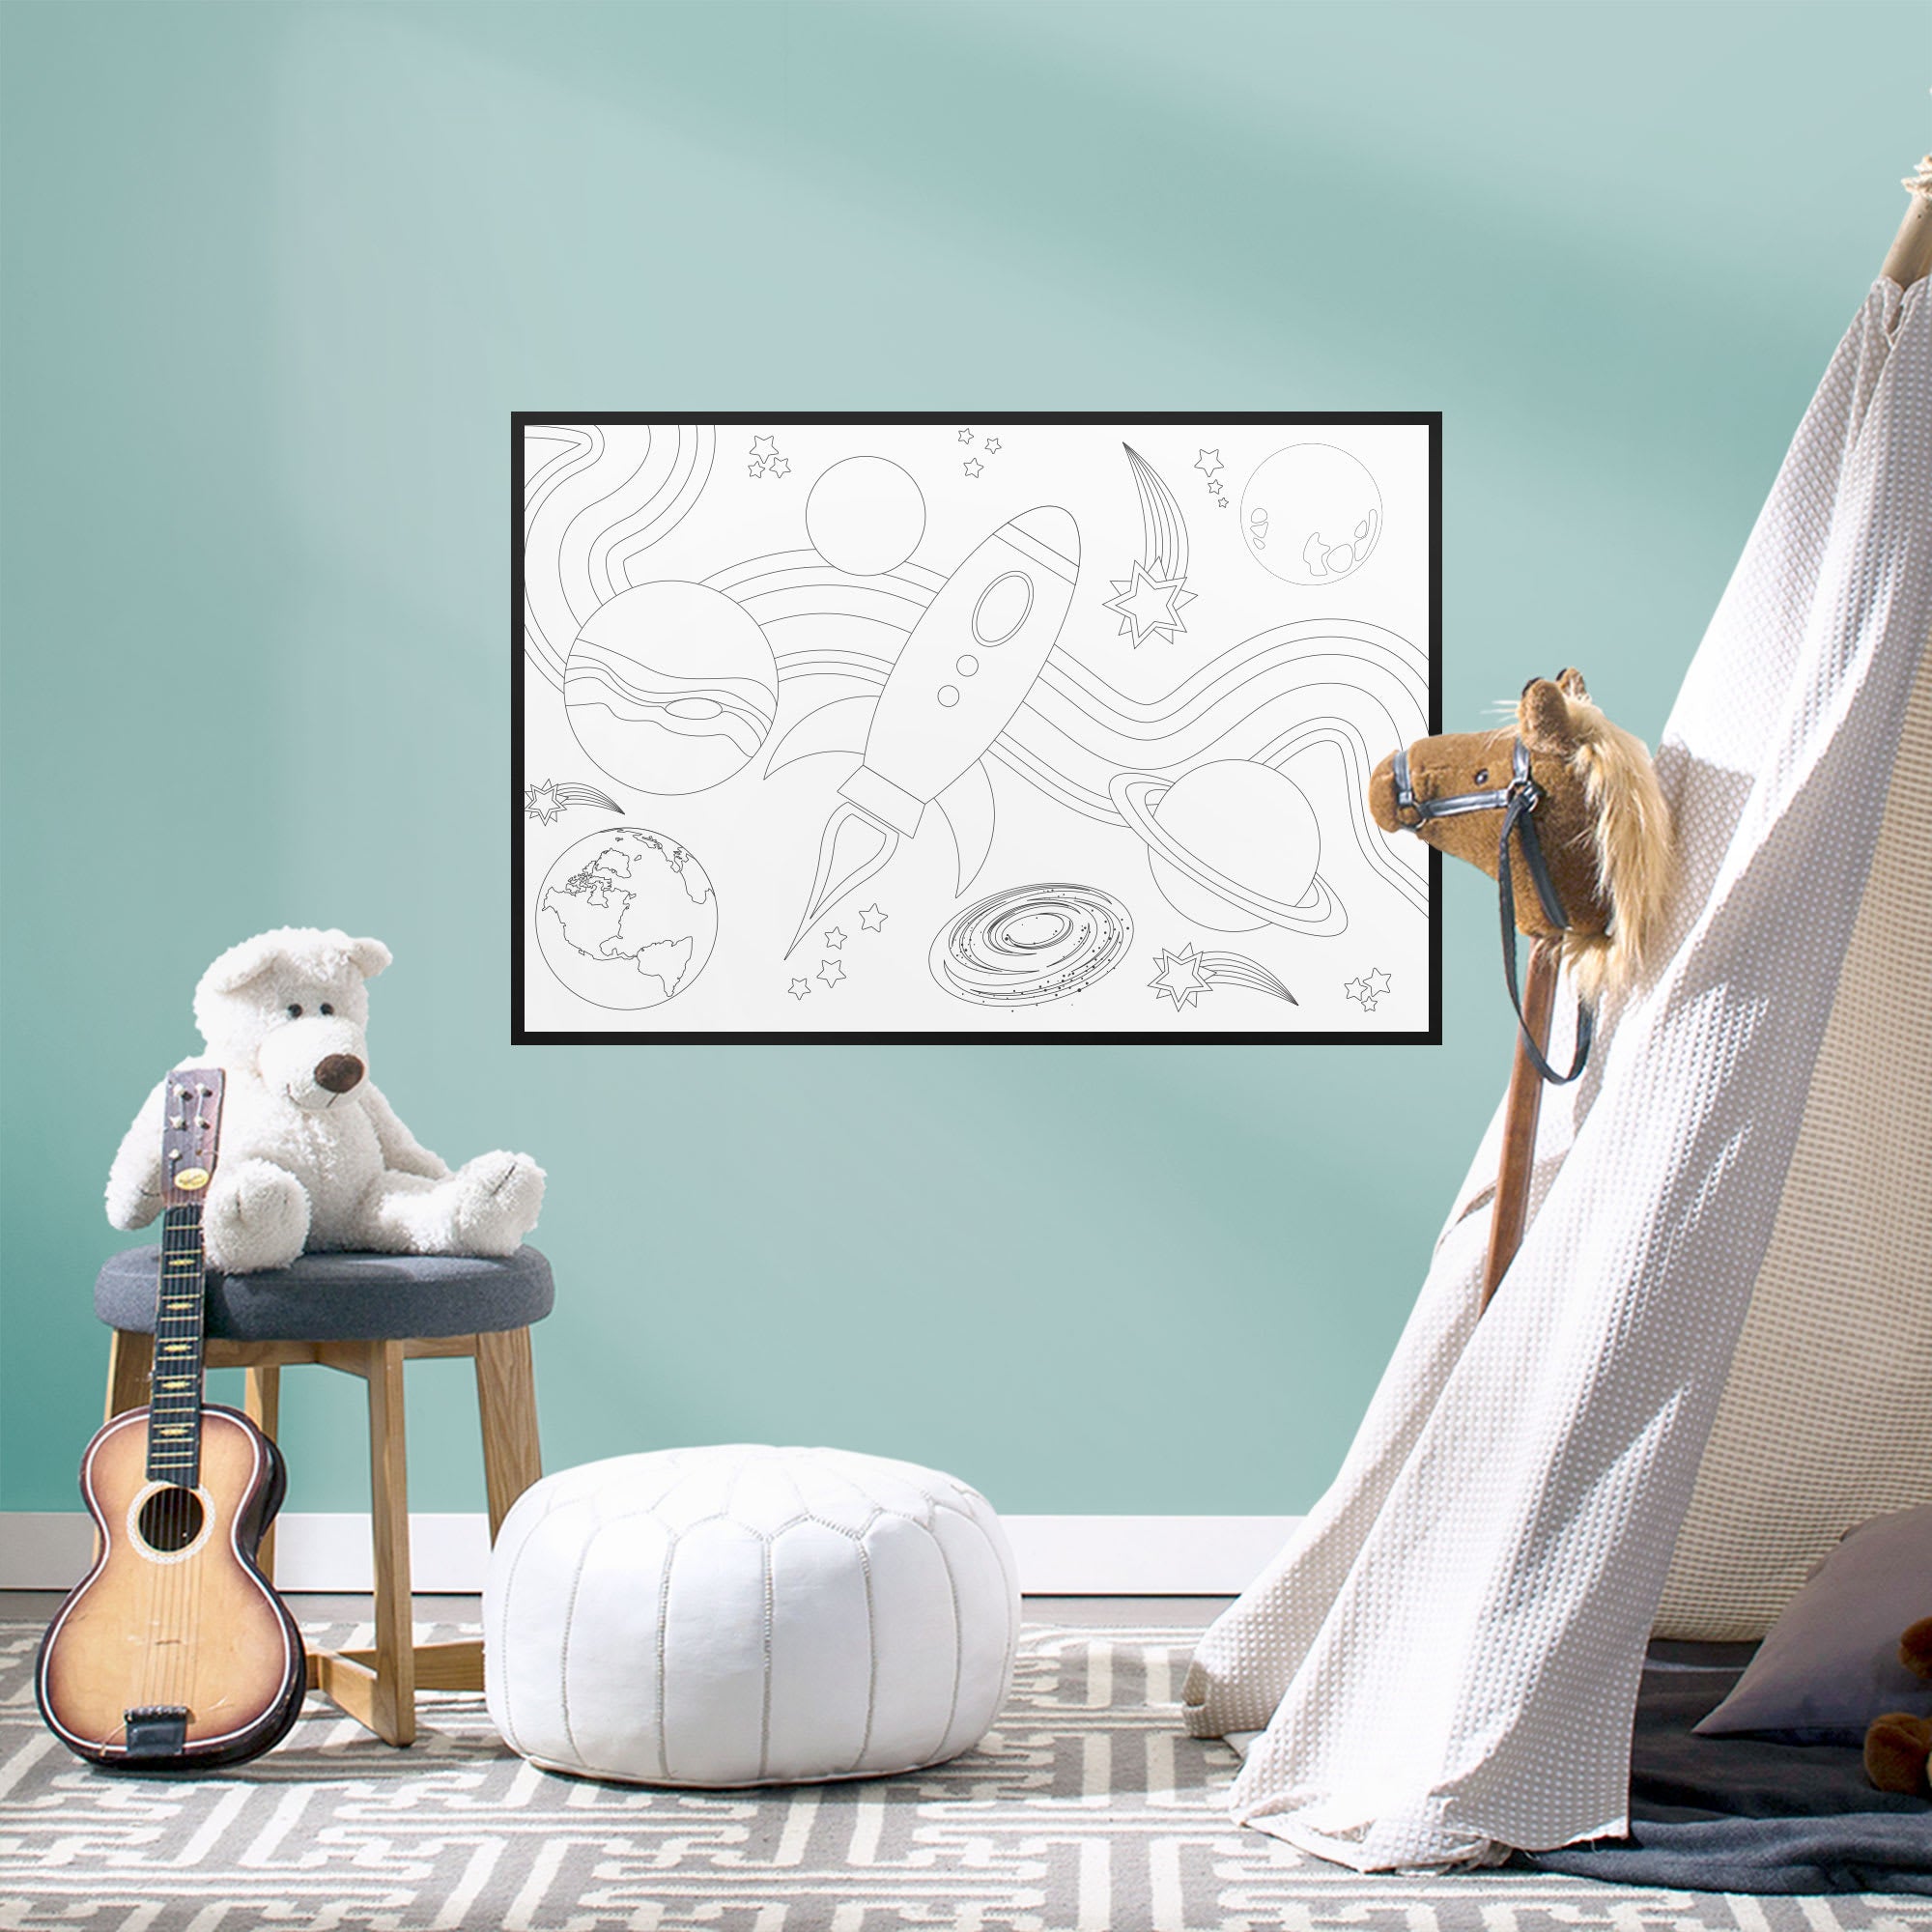 Coloring Sheet: Outer Space - Removable Dry Erase Vinyl Decal 34.0"W x 22.0"H by Fathead